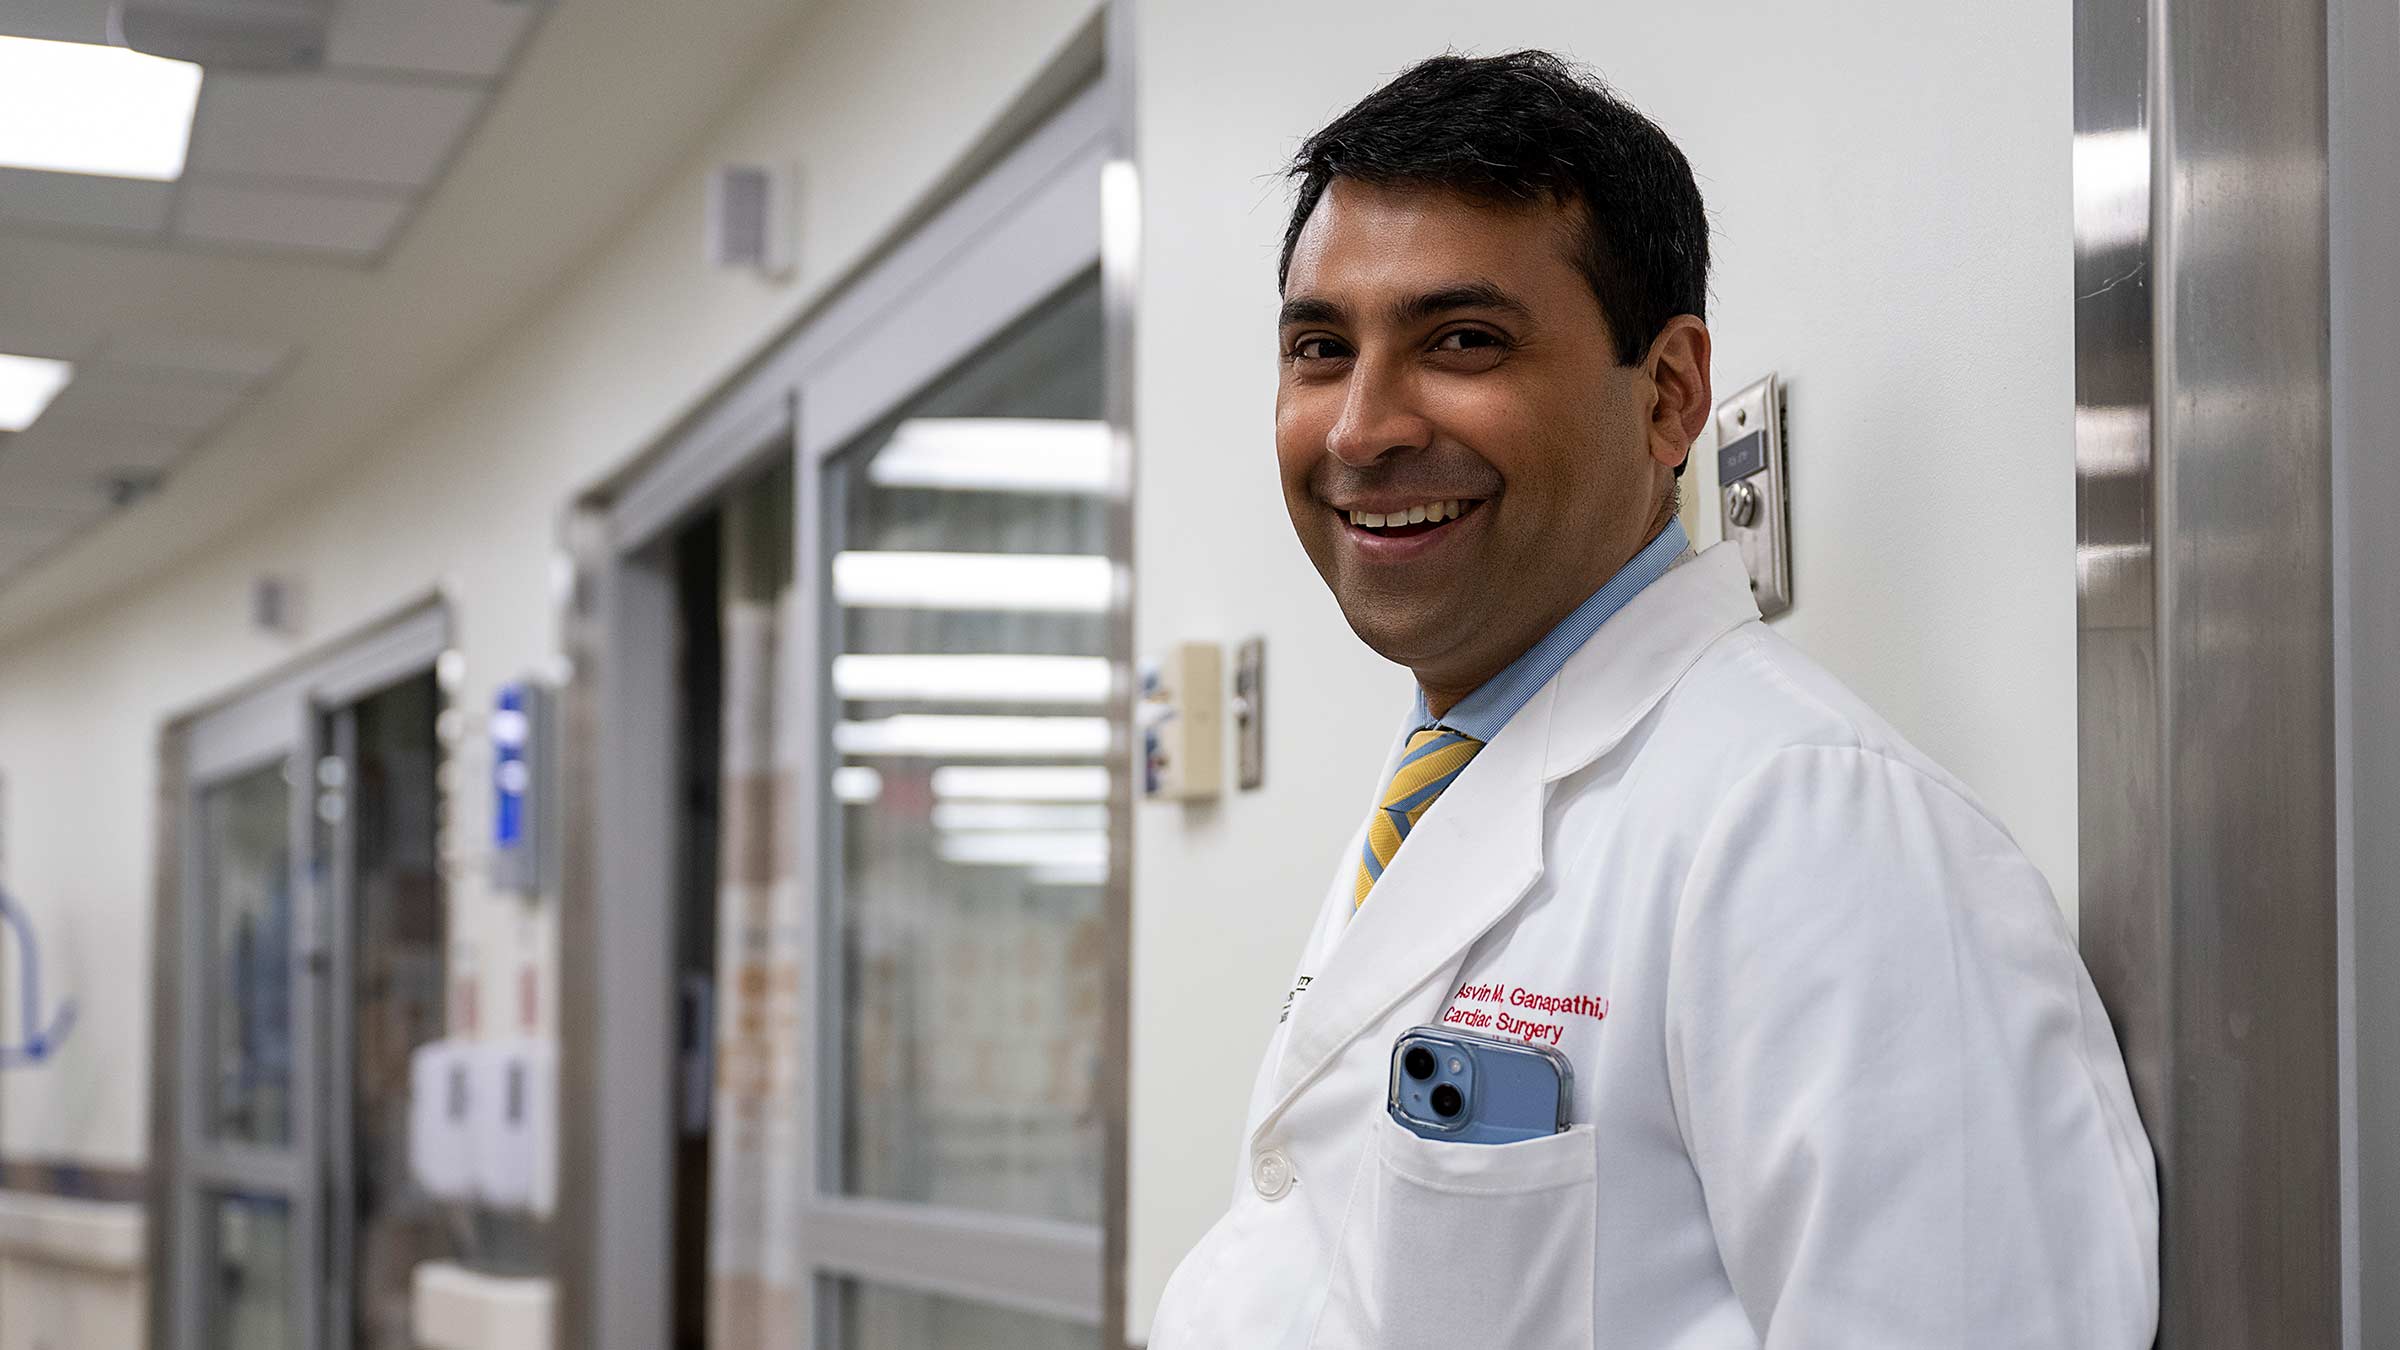 Dr. Asvin Ganapathi in the hallway